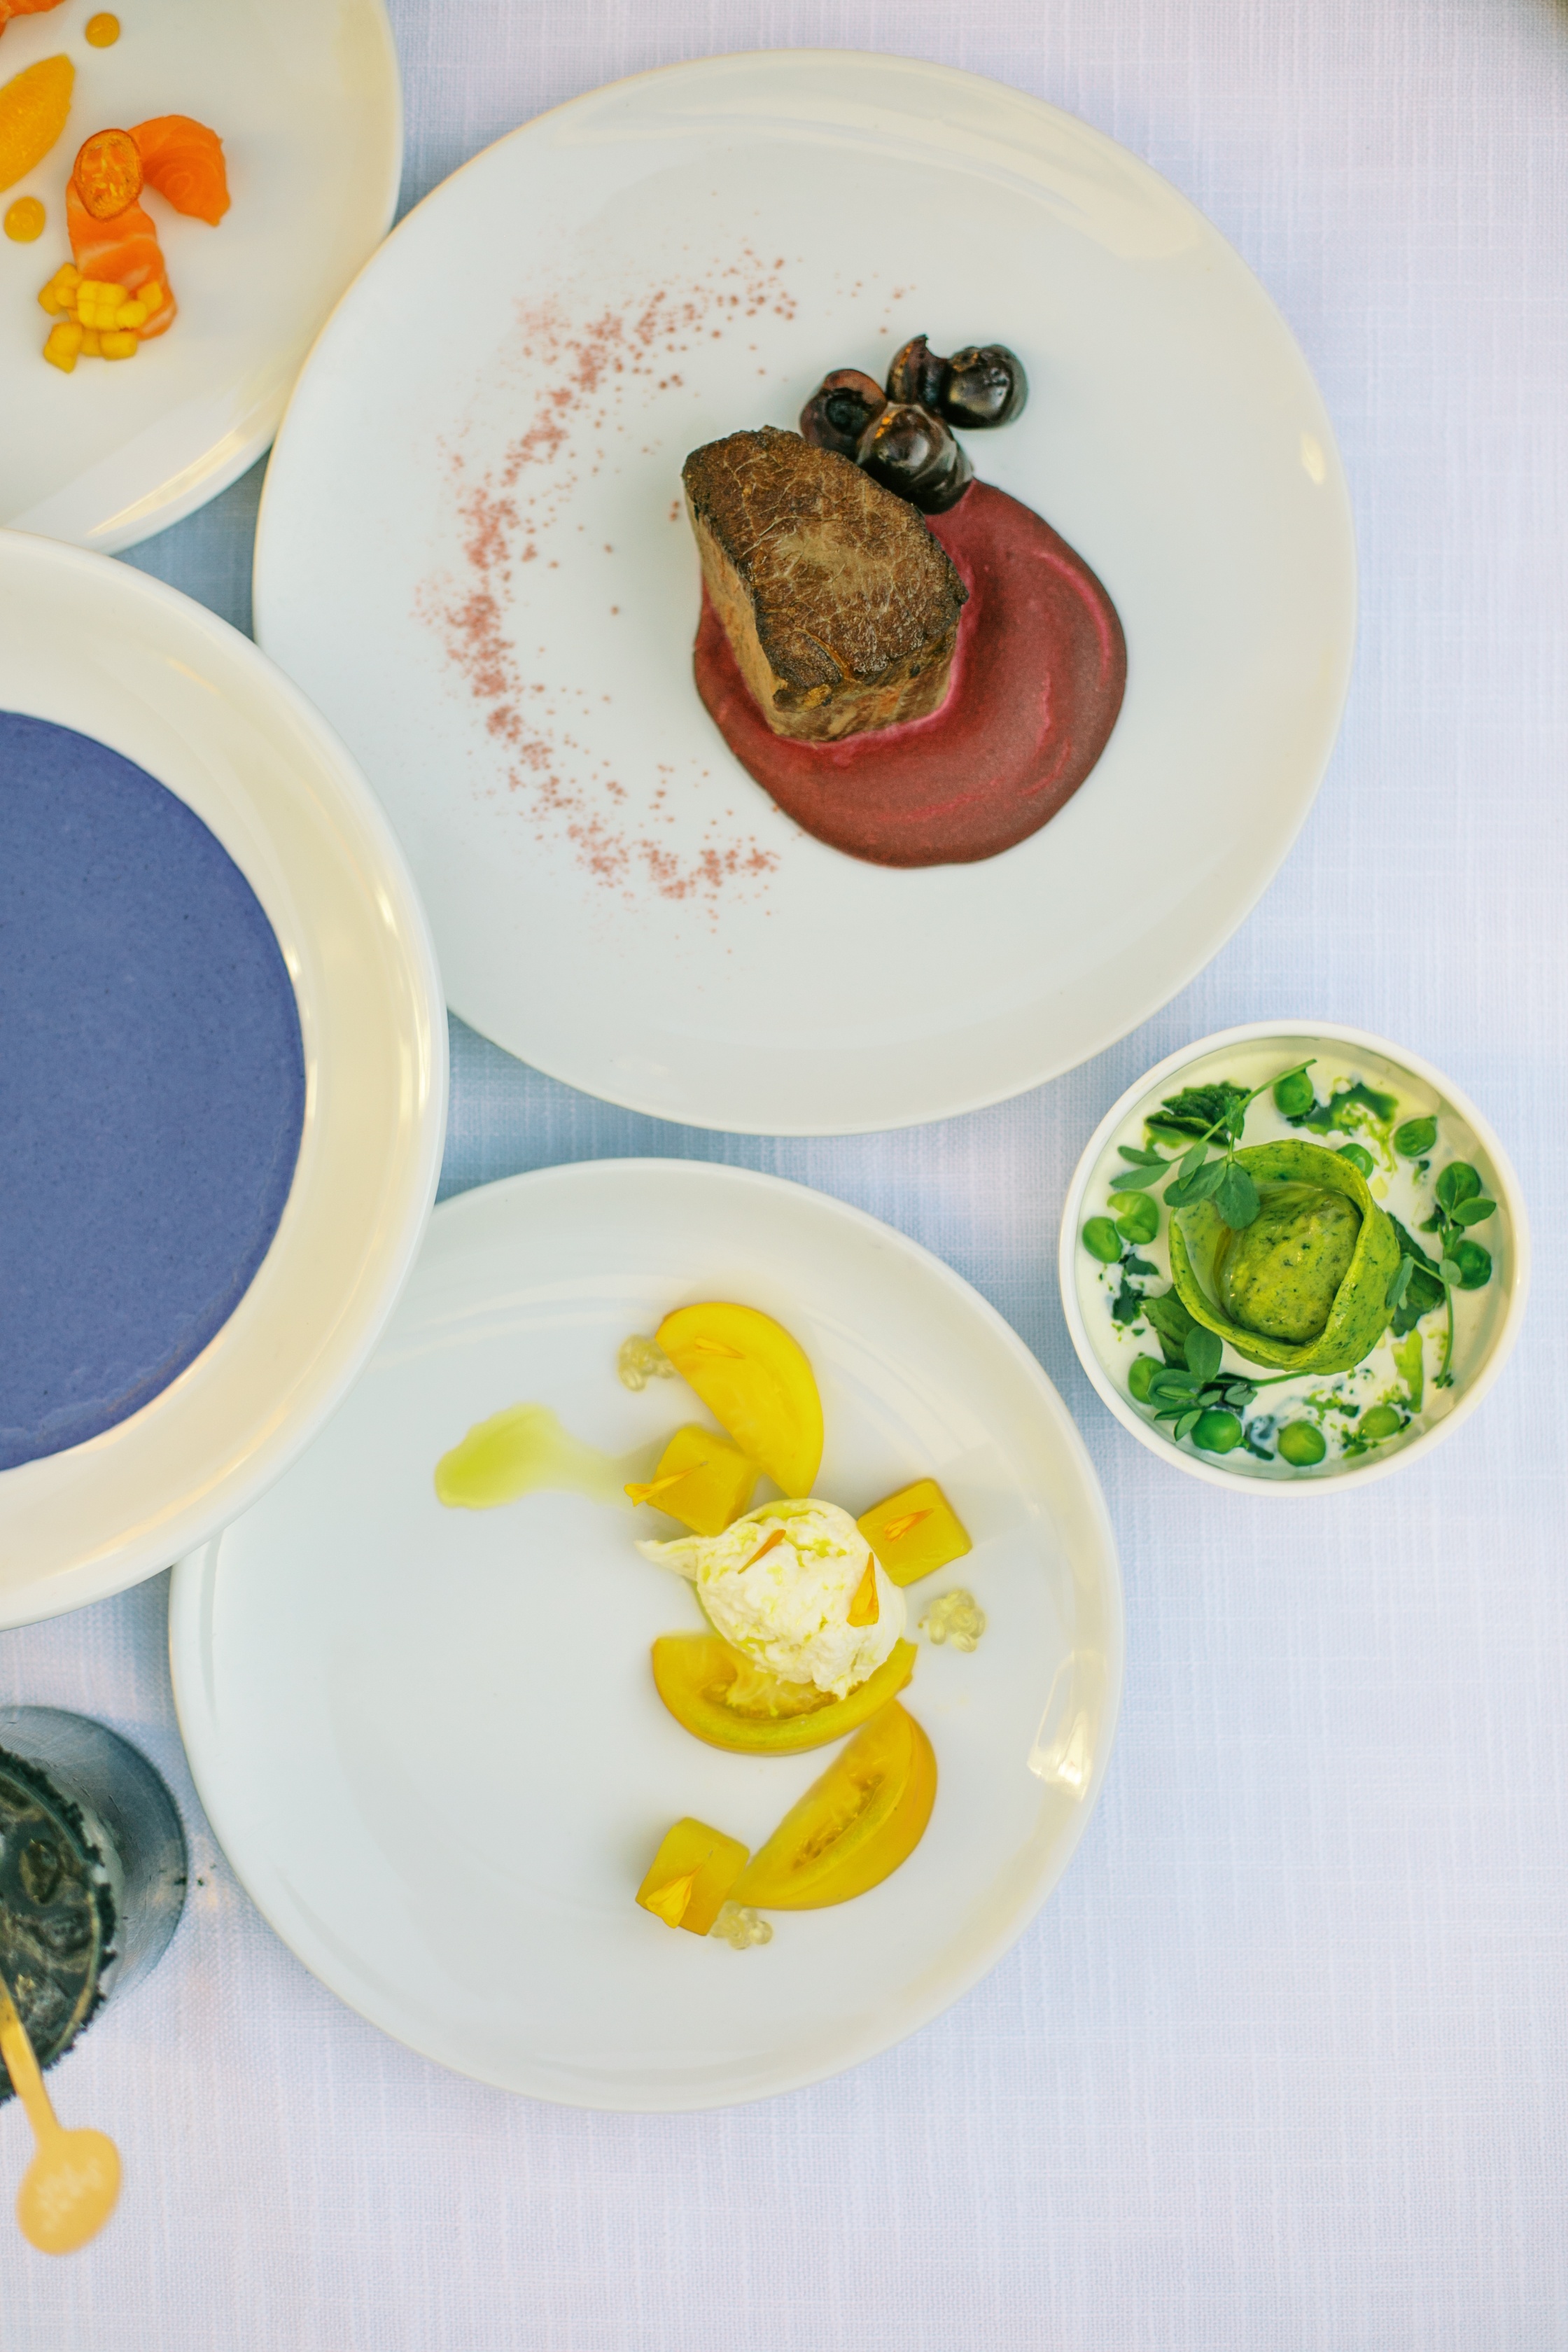 White plates with a food item that is only 1 color. In the middle right is a green tortellini, In the top middle is a red dish with steak and beet puree, underneath it are yellow tomatoes, yellows beets, yellow micro flower petals and burrata.